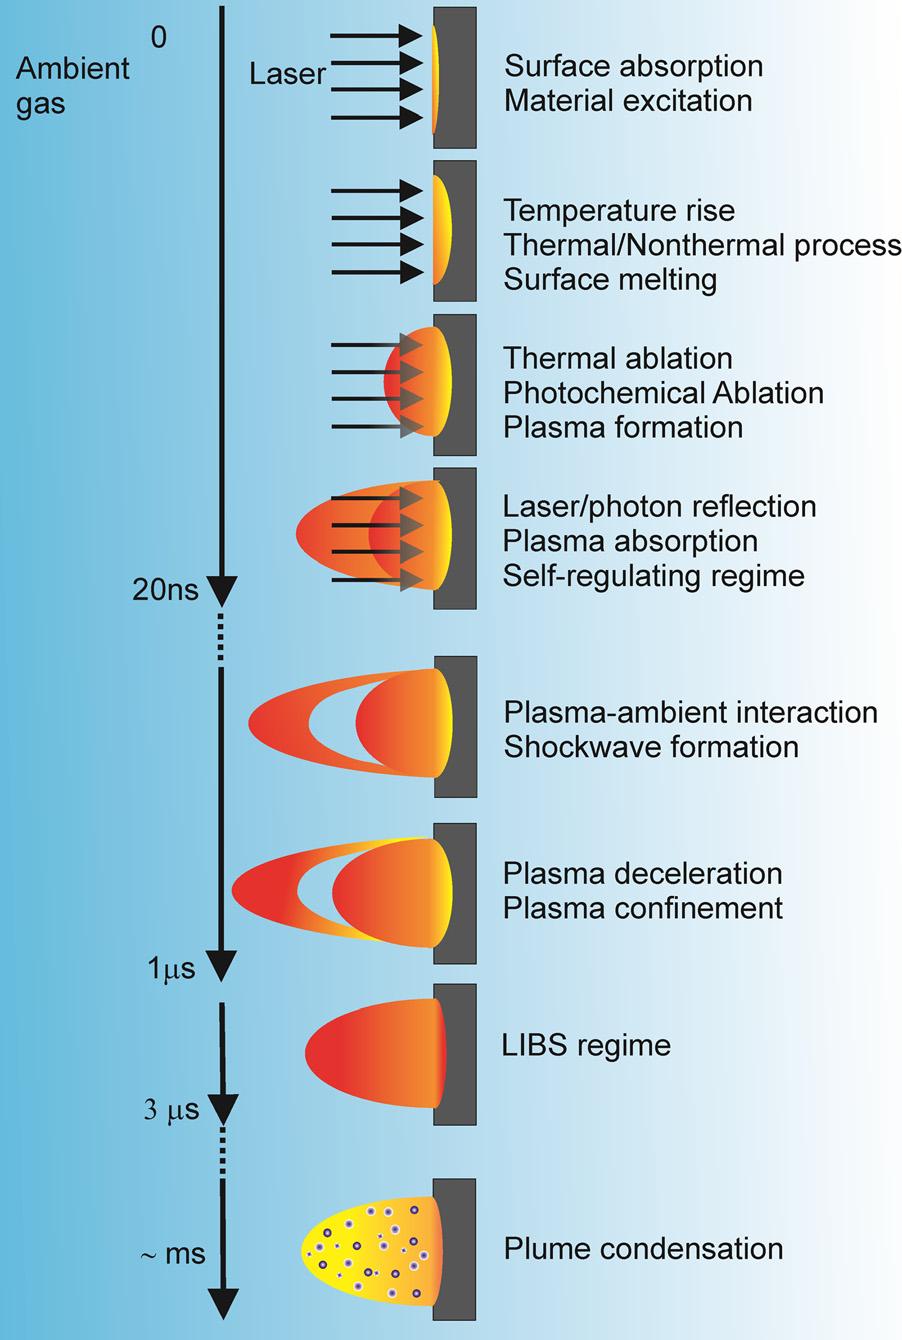 143305-2 Hussein et al. J. Appl. Phys. 113, 143305 (2013) II. EXPERIMENTAL DETAILS FIG. 1. Schematic of processes involved in ns laser ablation in 1 atmosphere air, with an approximate timeline of their occurrence.